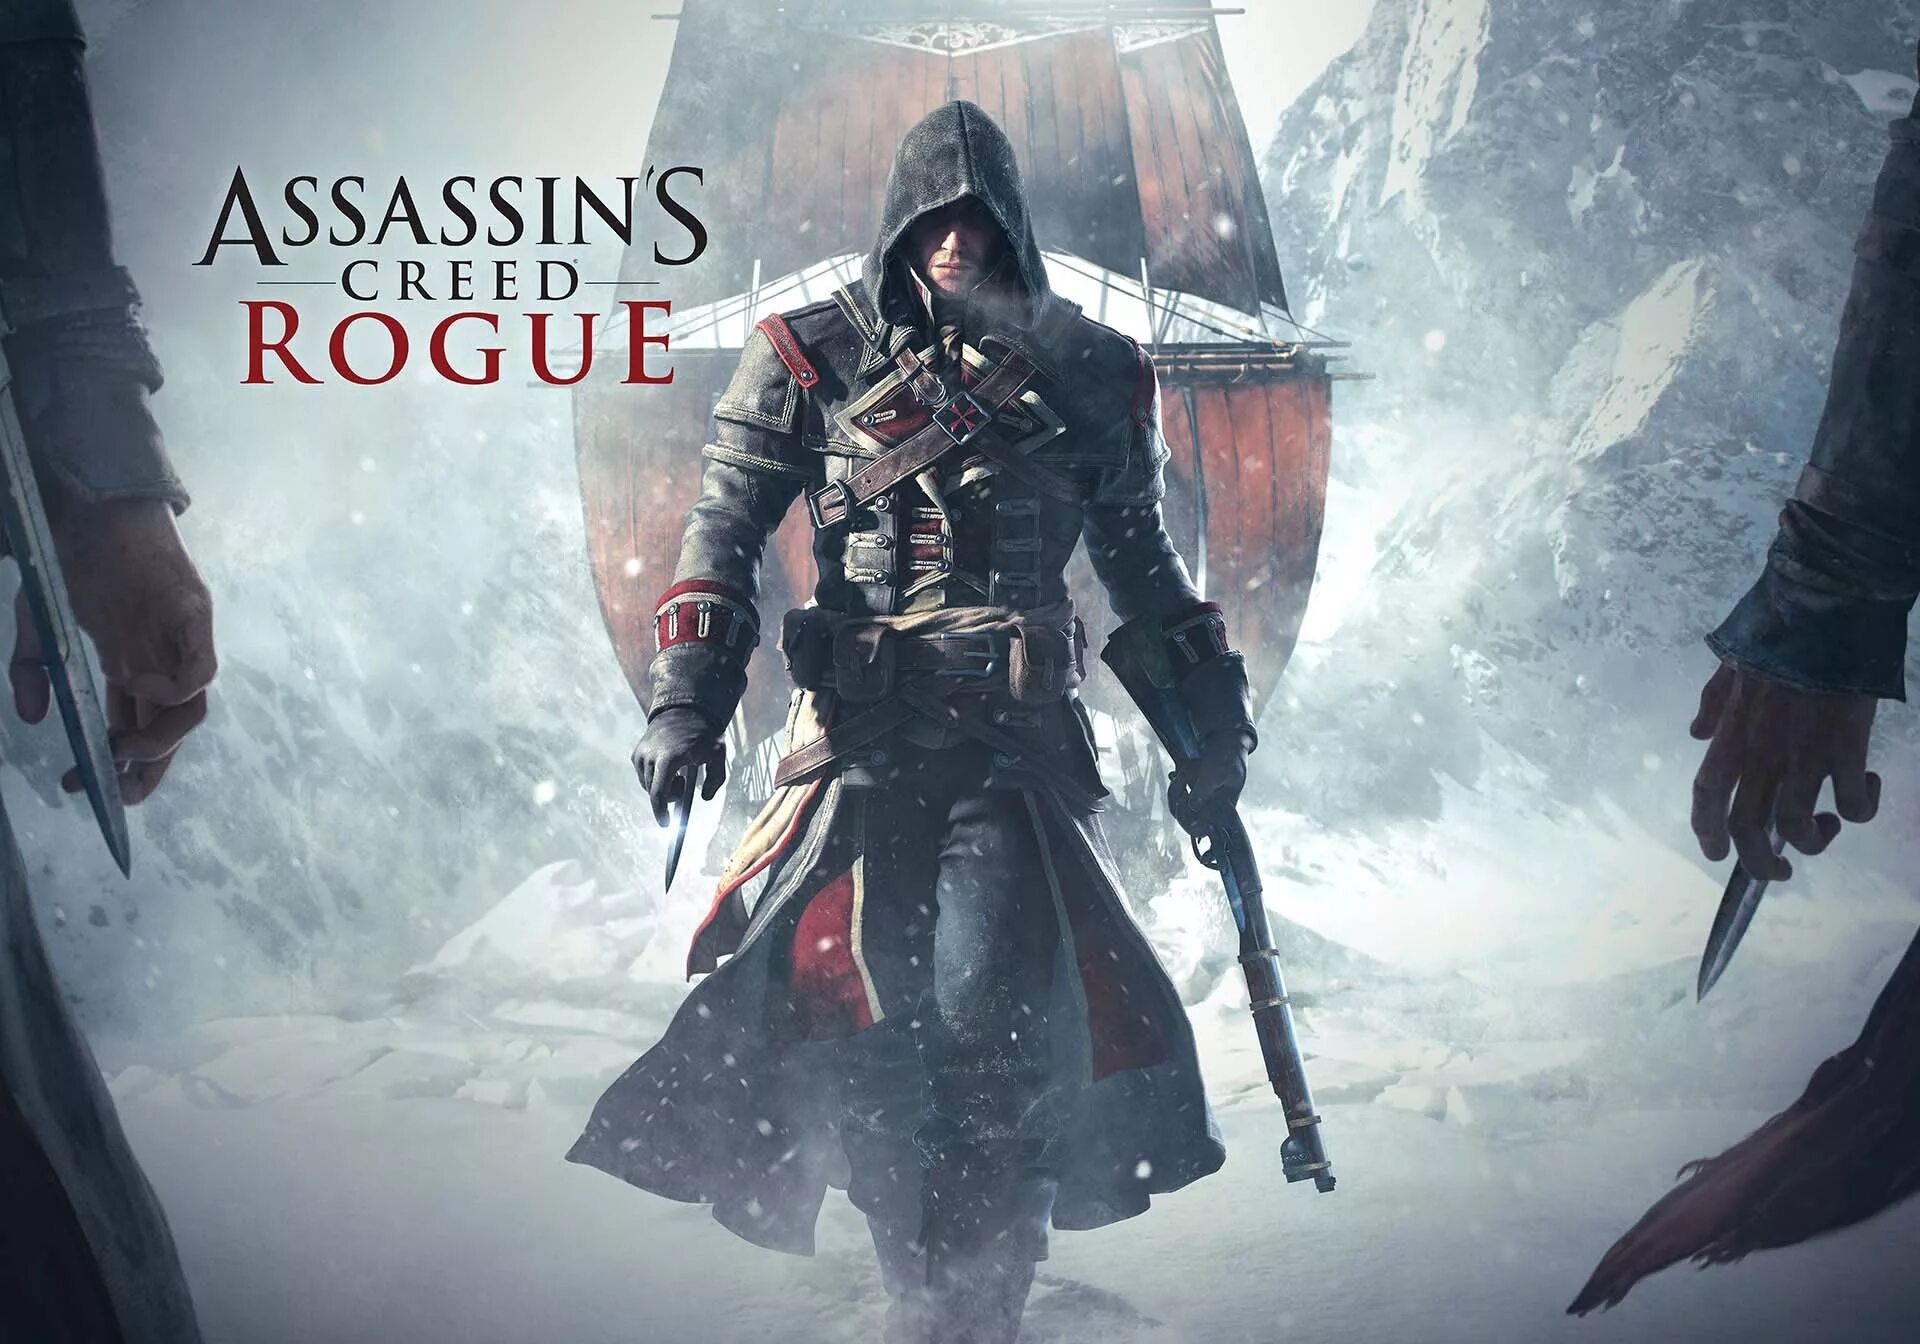 Assassin s Creed Rogue. Ассасин Крид Роуг обложка. Assassin's Creed Rogue обложка. Ассасин рог